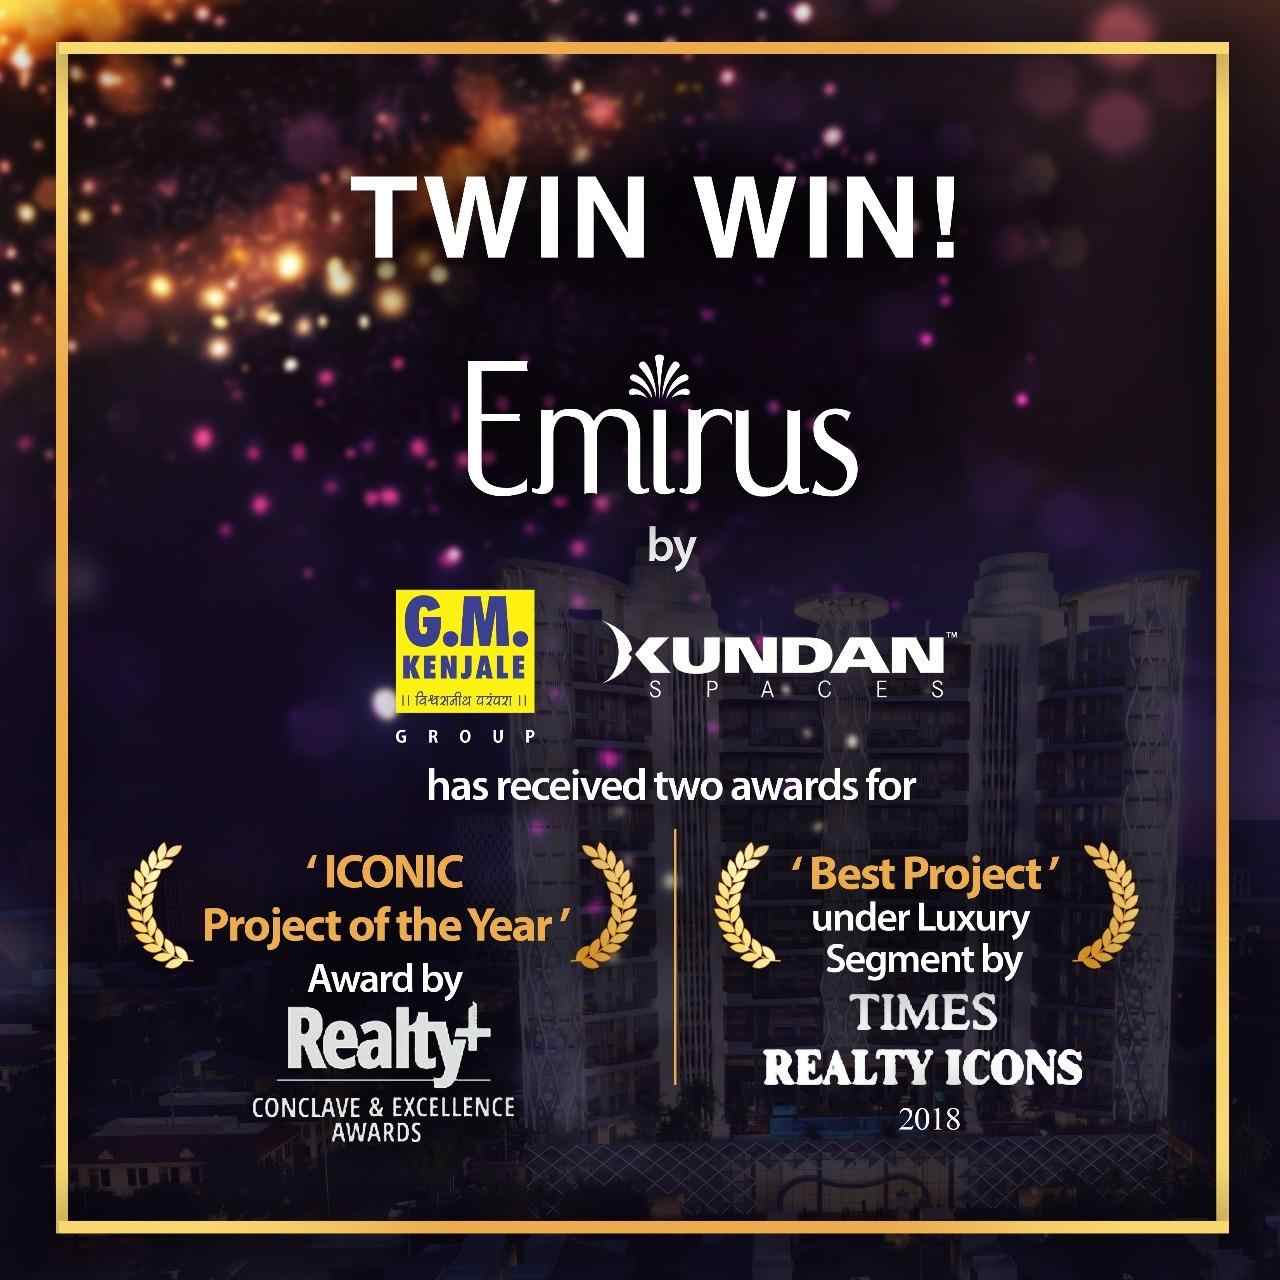 Emirus by Kundan Spaces awarded Iconic Project of the Year & Best Project under luxury segment 2018